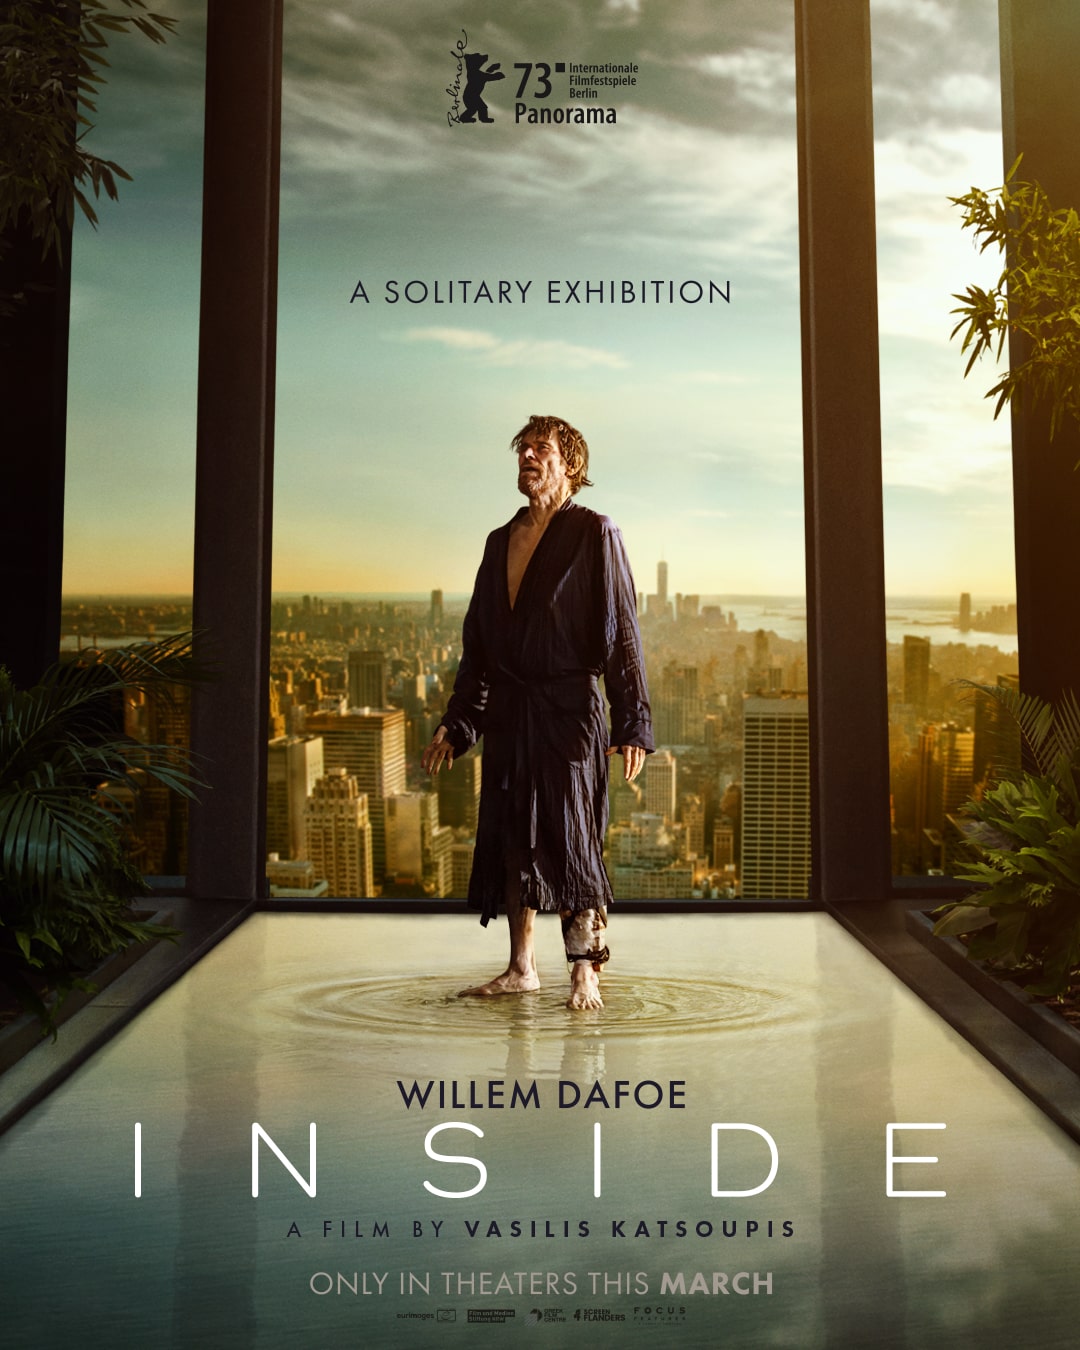 INSIDE, a Focus Features release